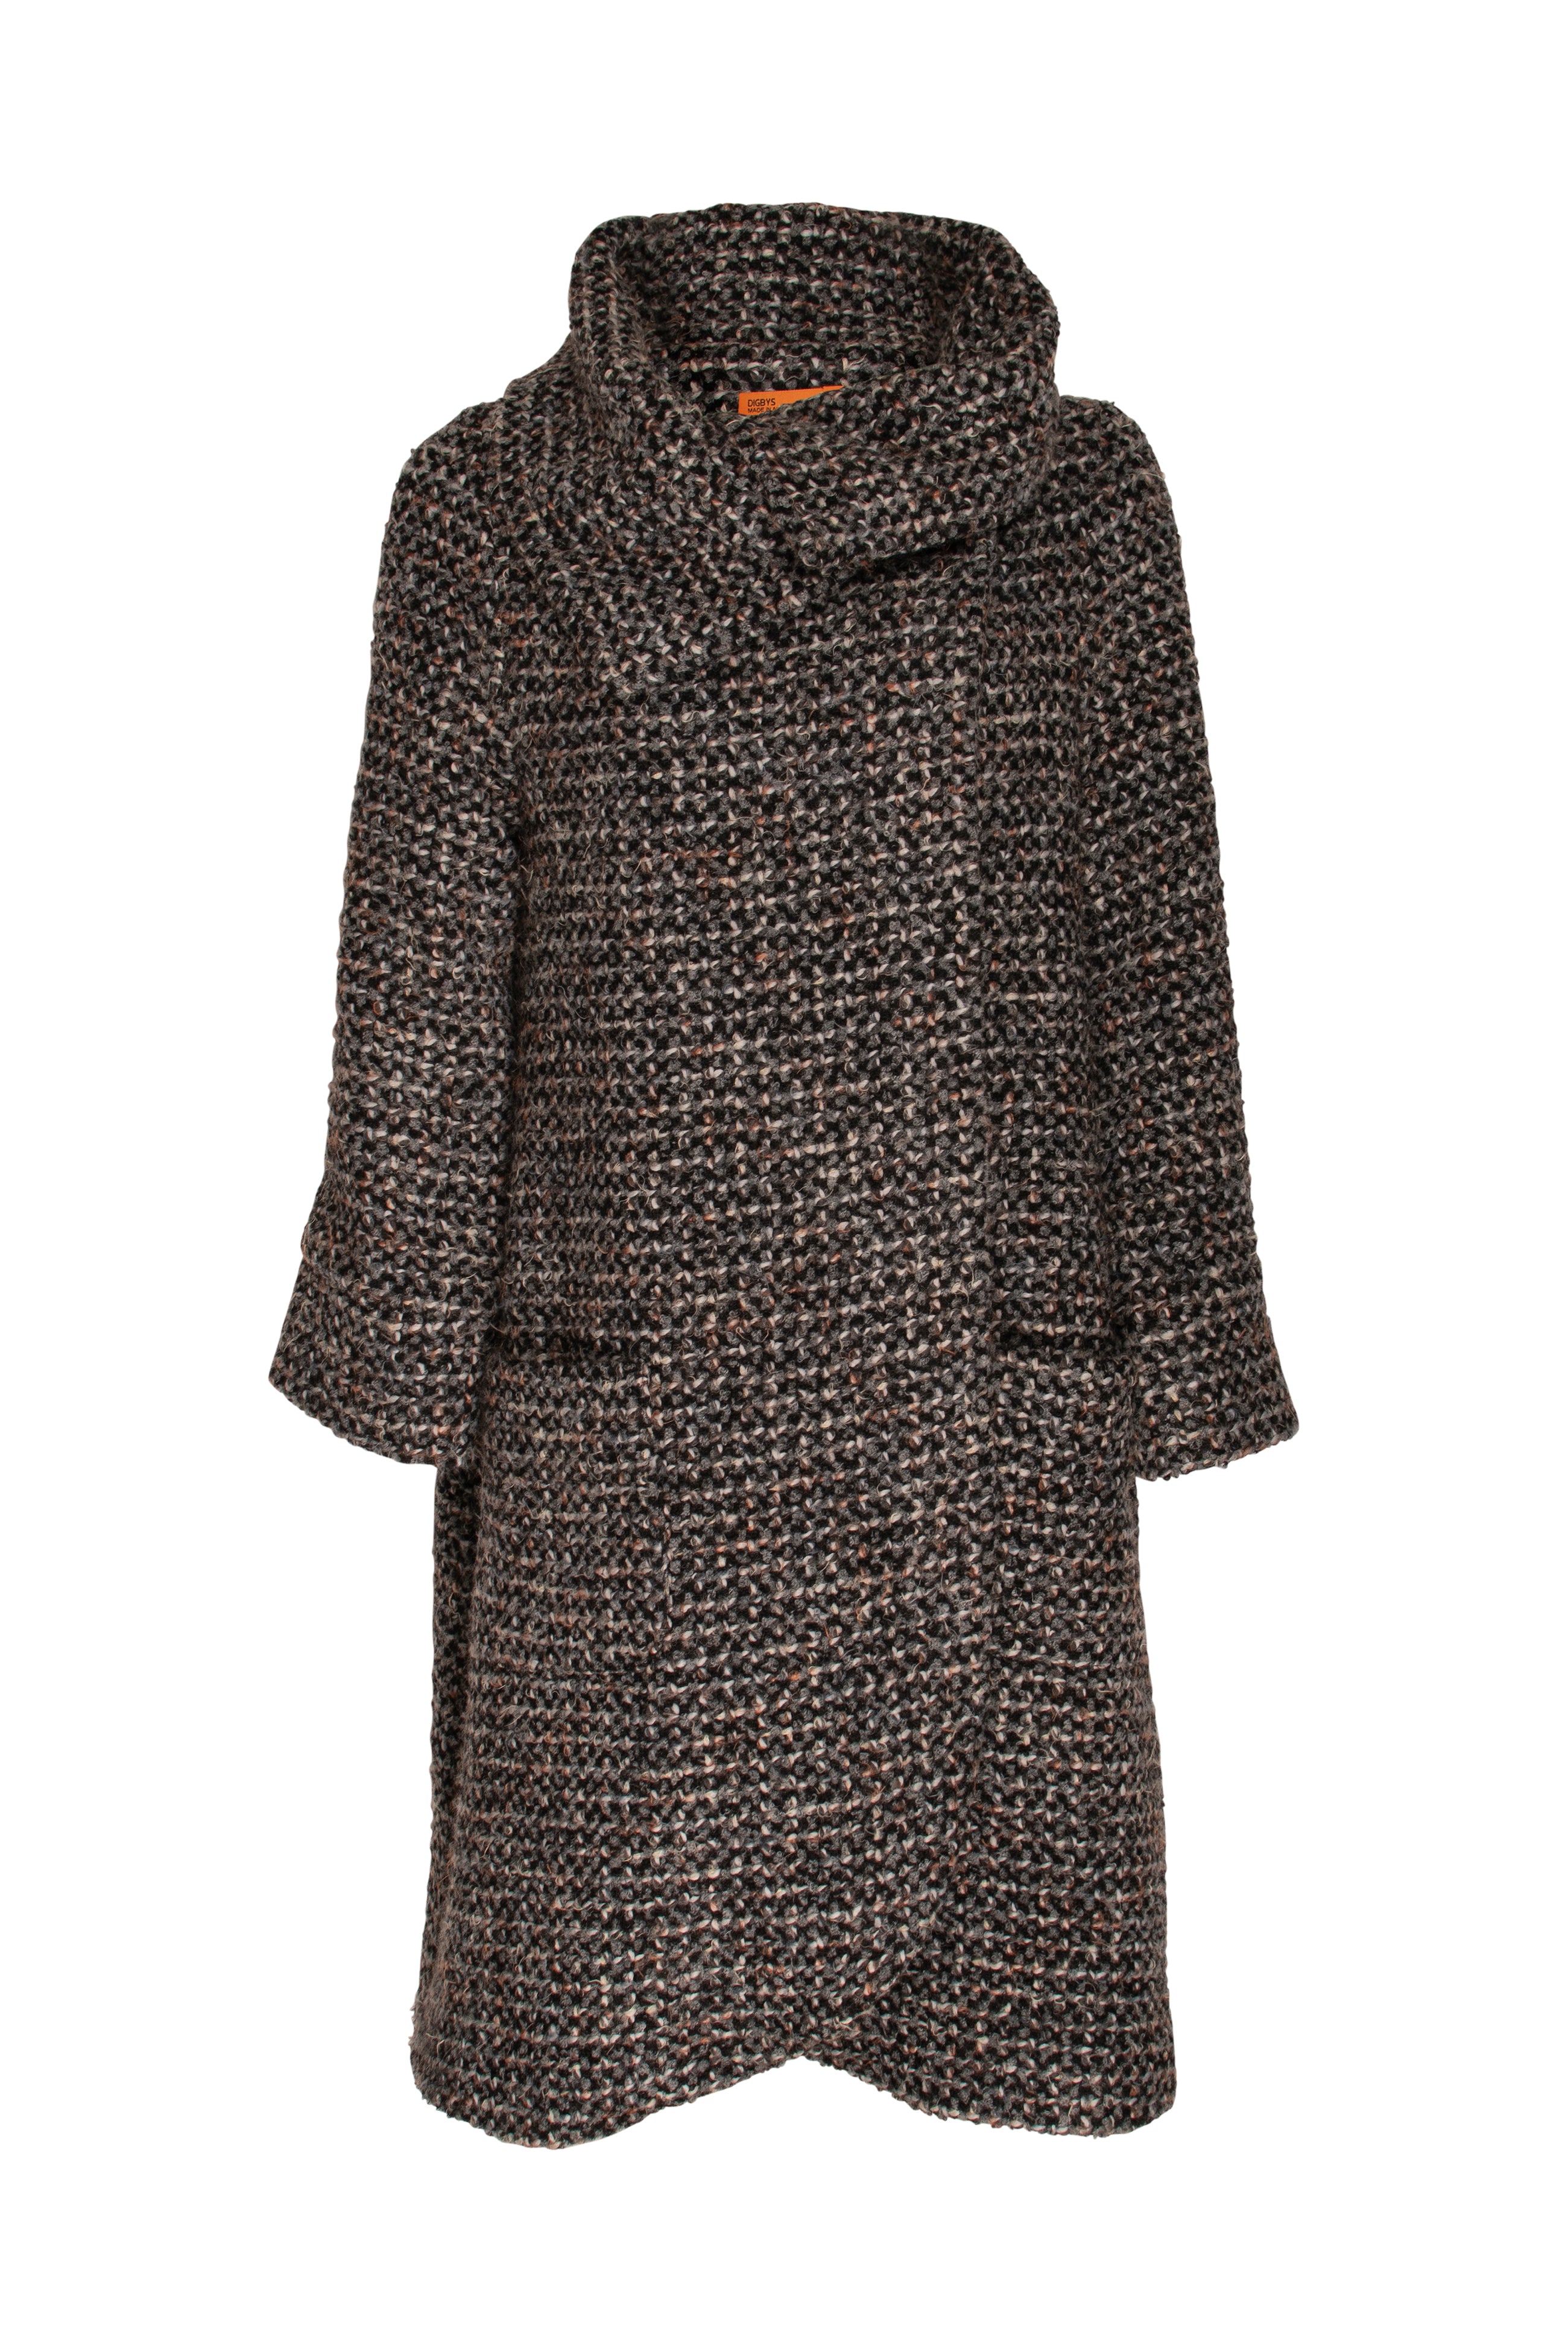 Crossover Collar Coat - Charcoal Texture 5015